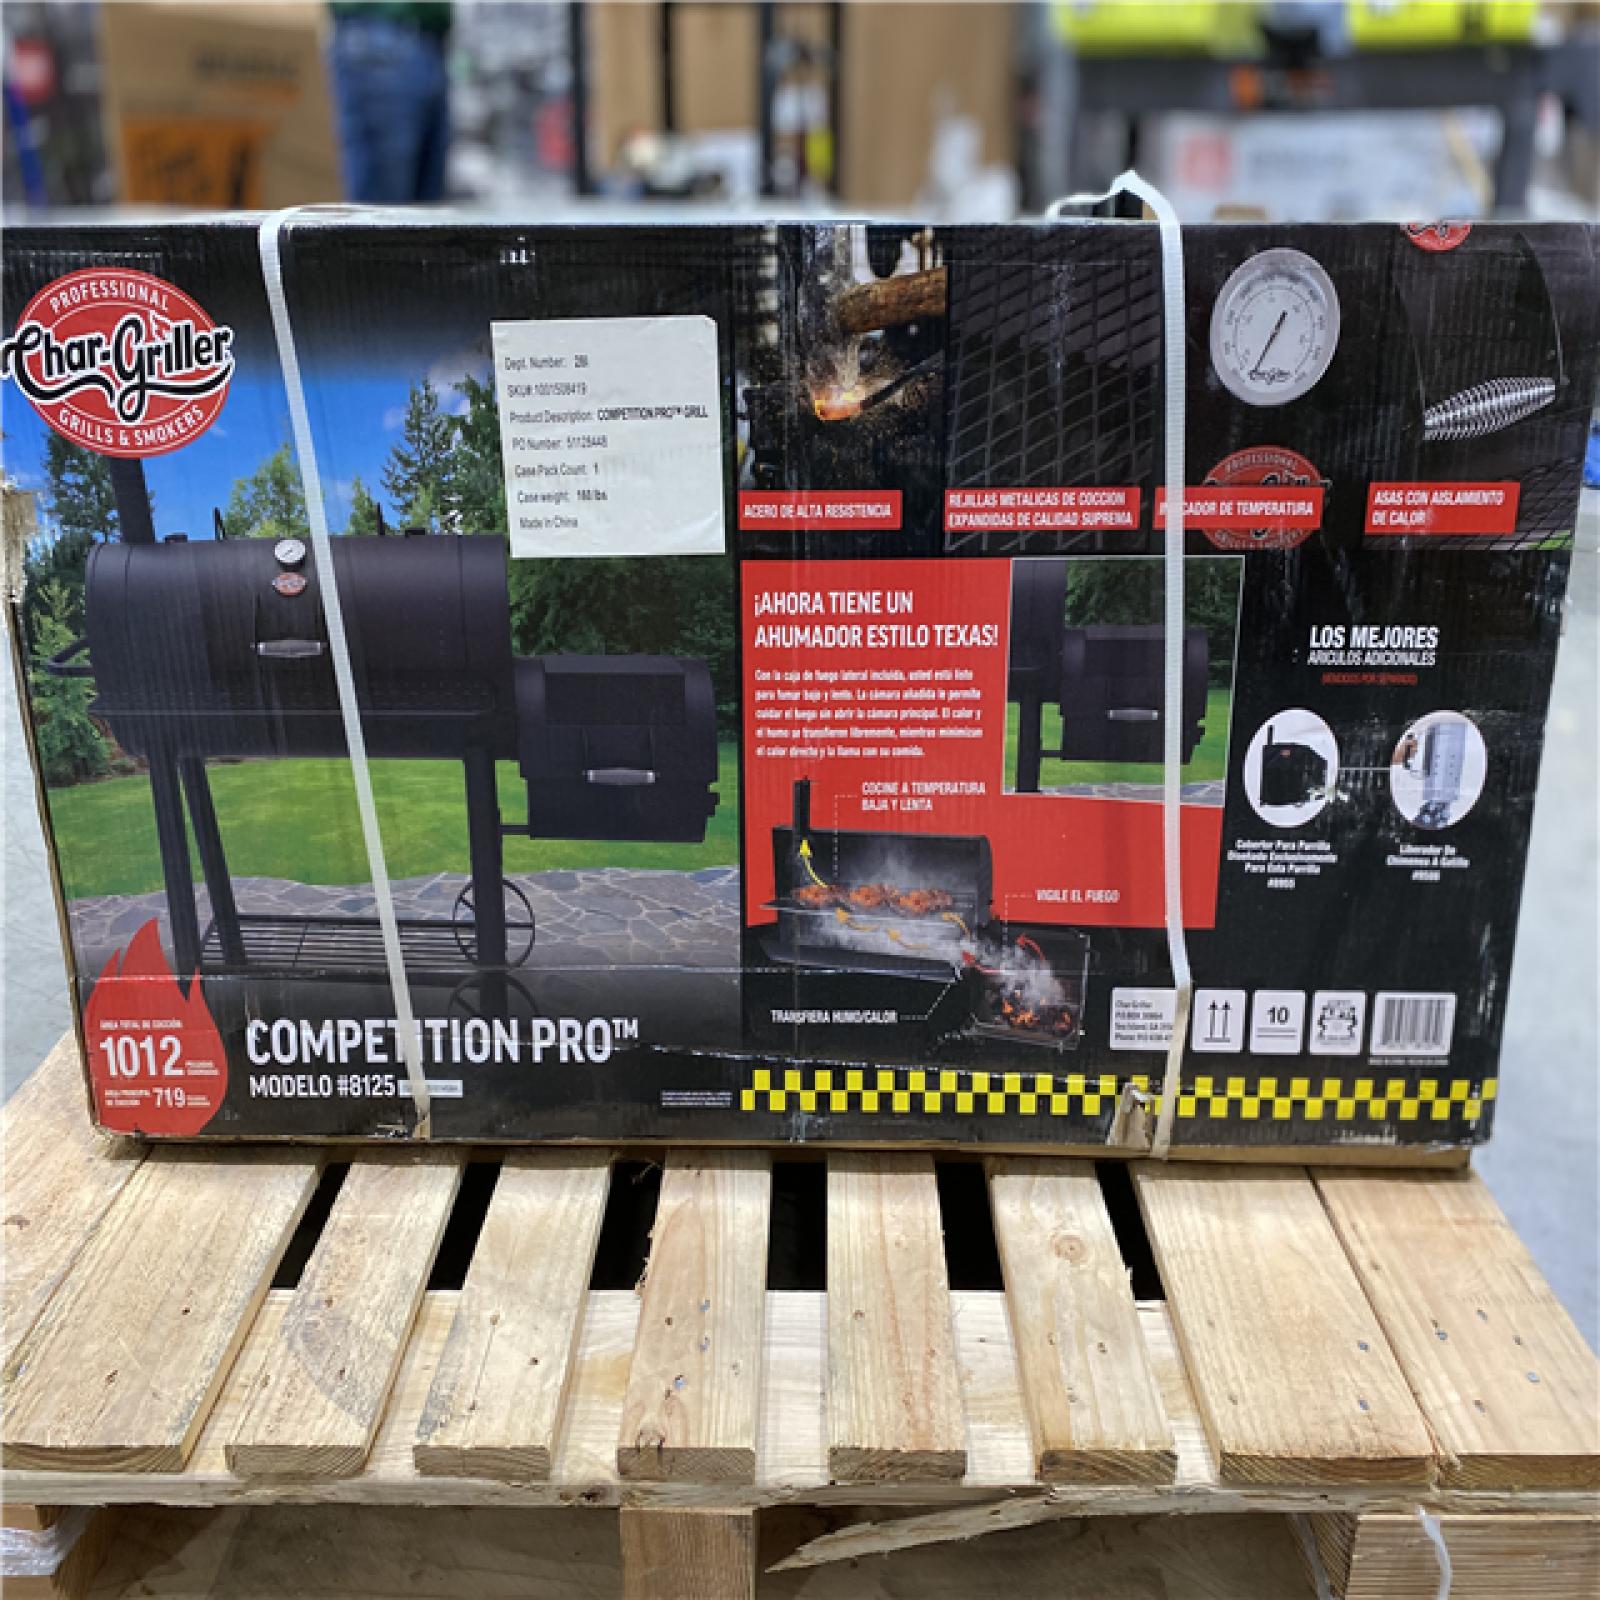 DALLAS LOCATION - Char-Griller 1012 sq. in. Competition Pro Offset Charcoal Grill or Wood Smoker in Black